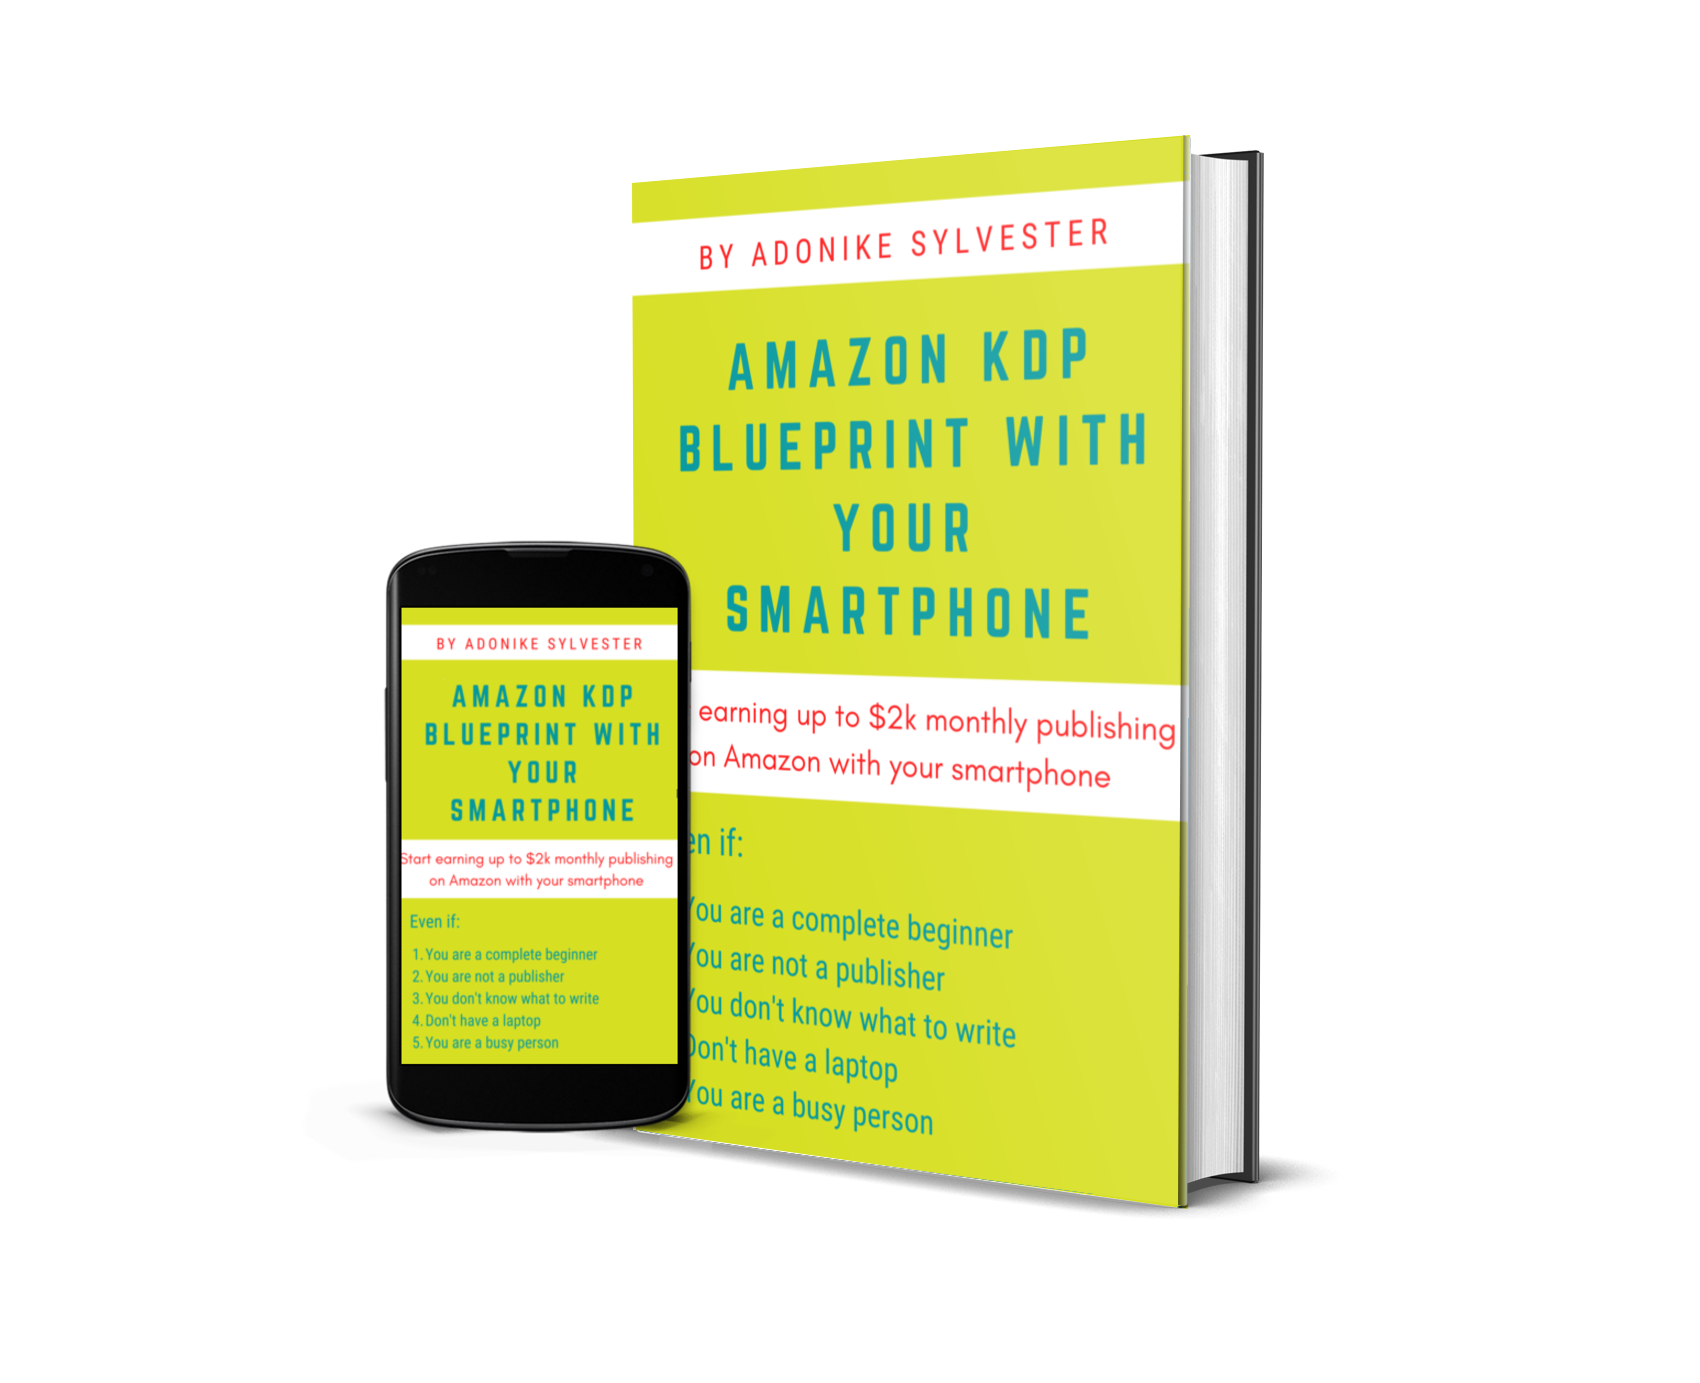 Amazon KDP Blueprint cover by Adonike Sylvester